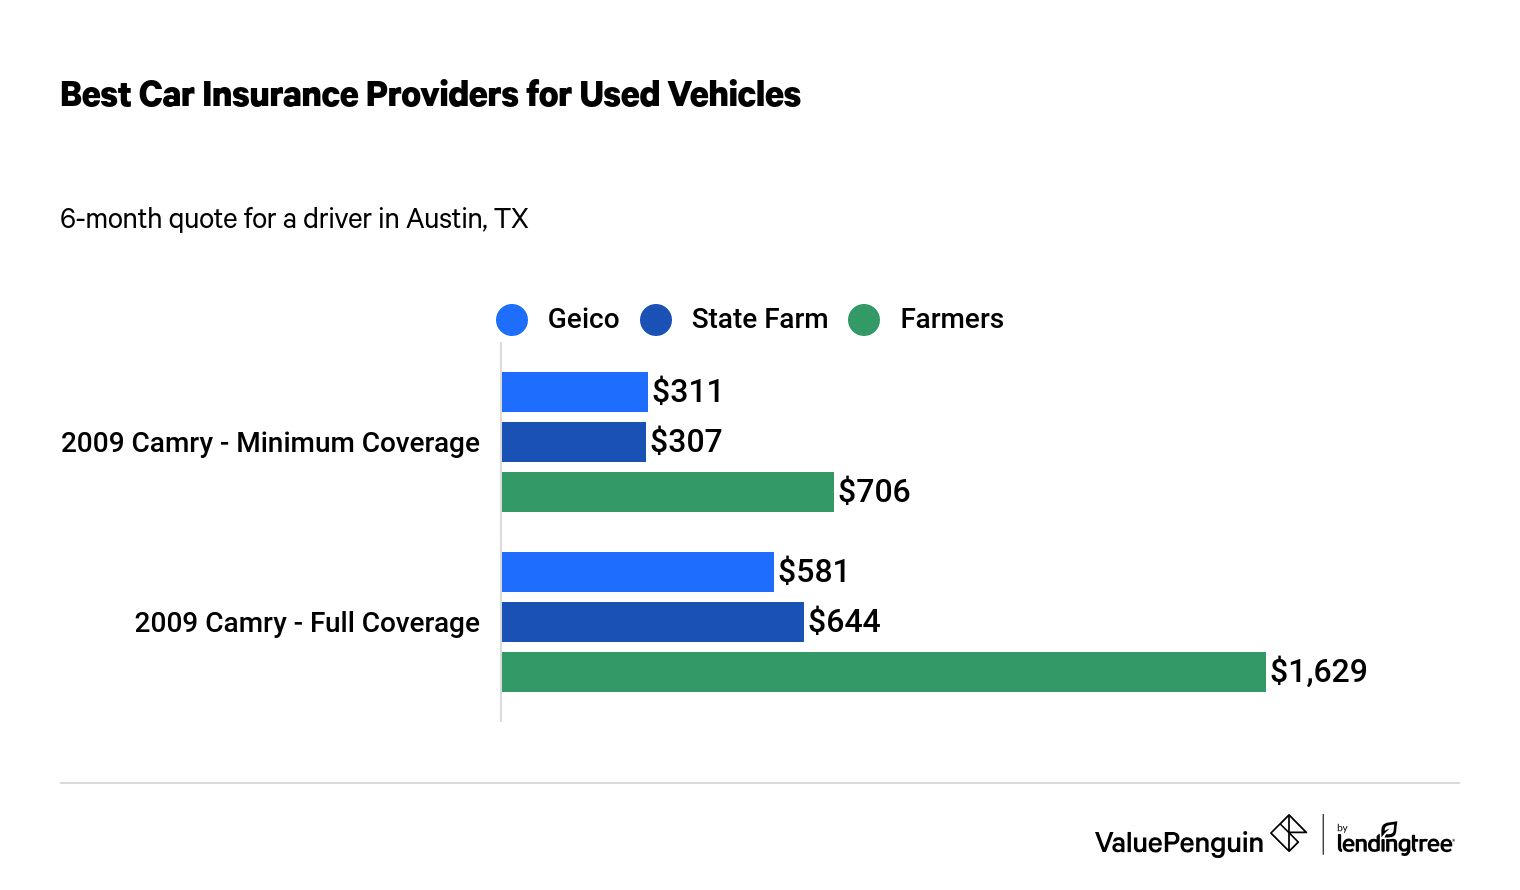 Bar chart showing how Geico, State Farm and Farmers insurance rates compare for a 2009 Toyota Camry